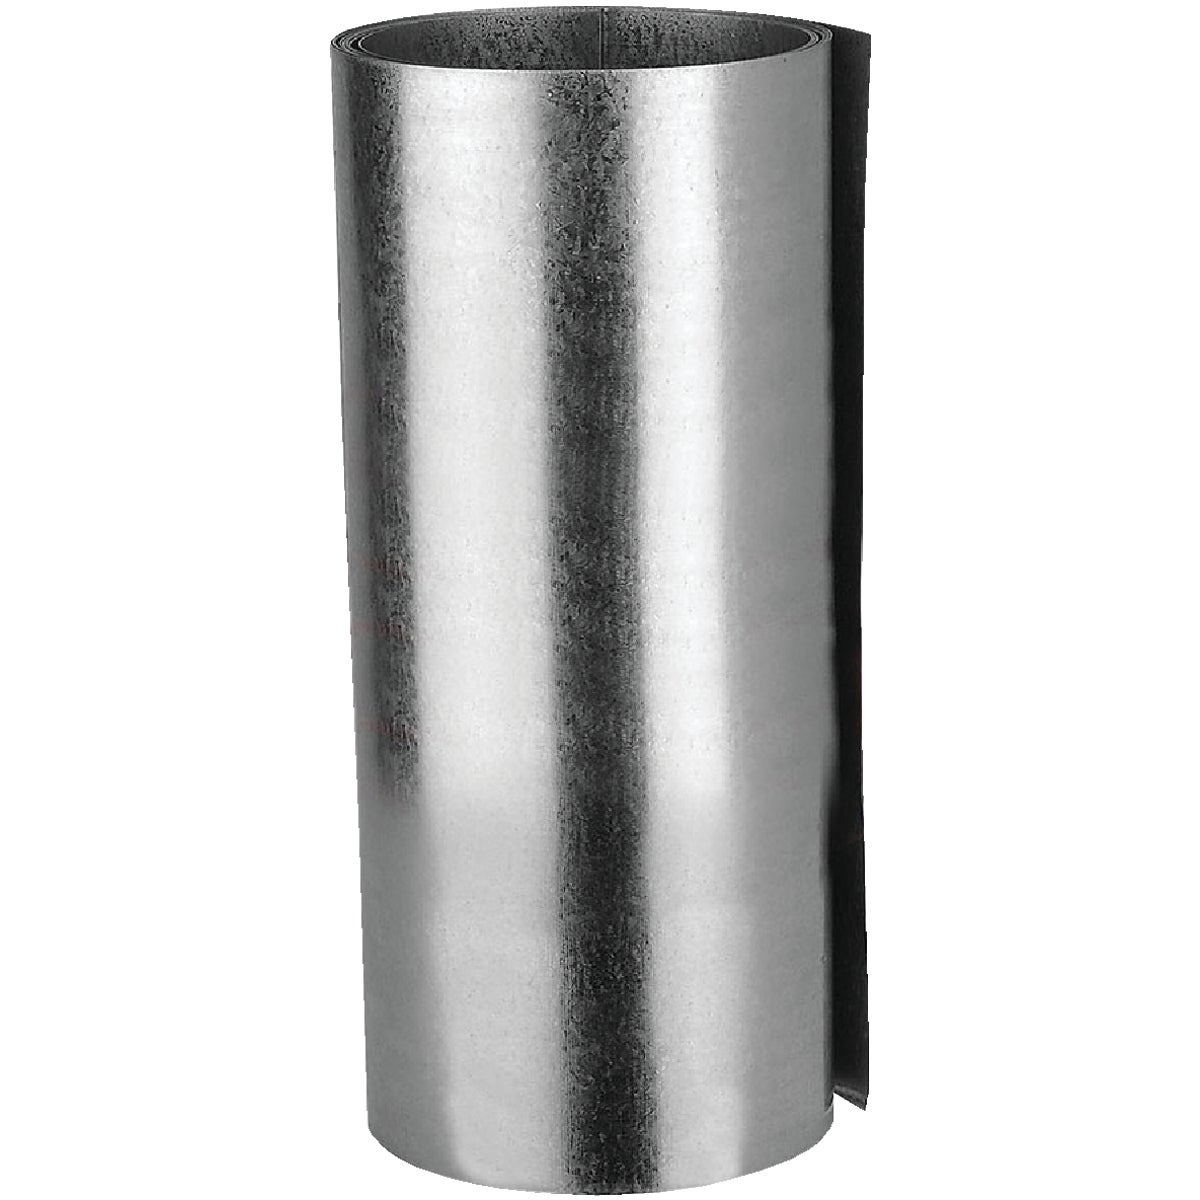 NorWesco 518904 NorWesco 20 In. x 50 Ft. Mill Galvanized Roll Valley Flashing 518904